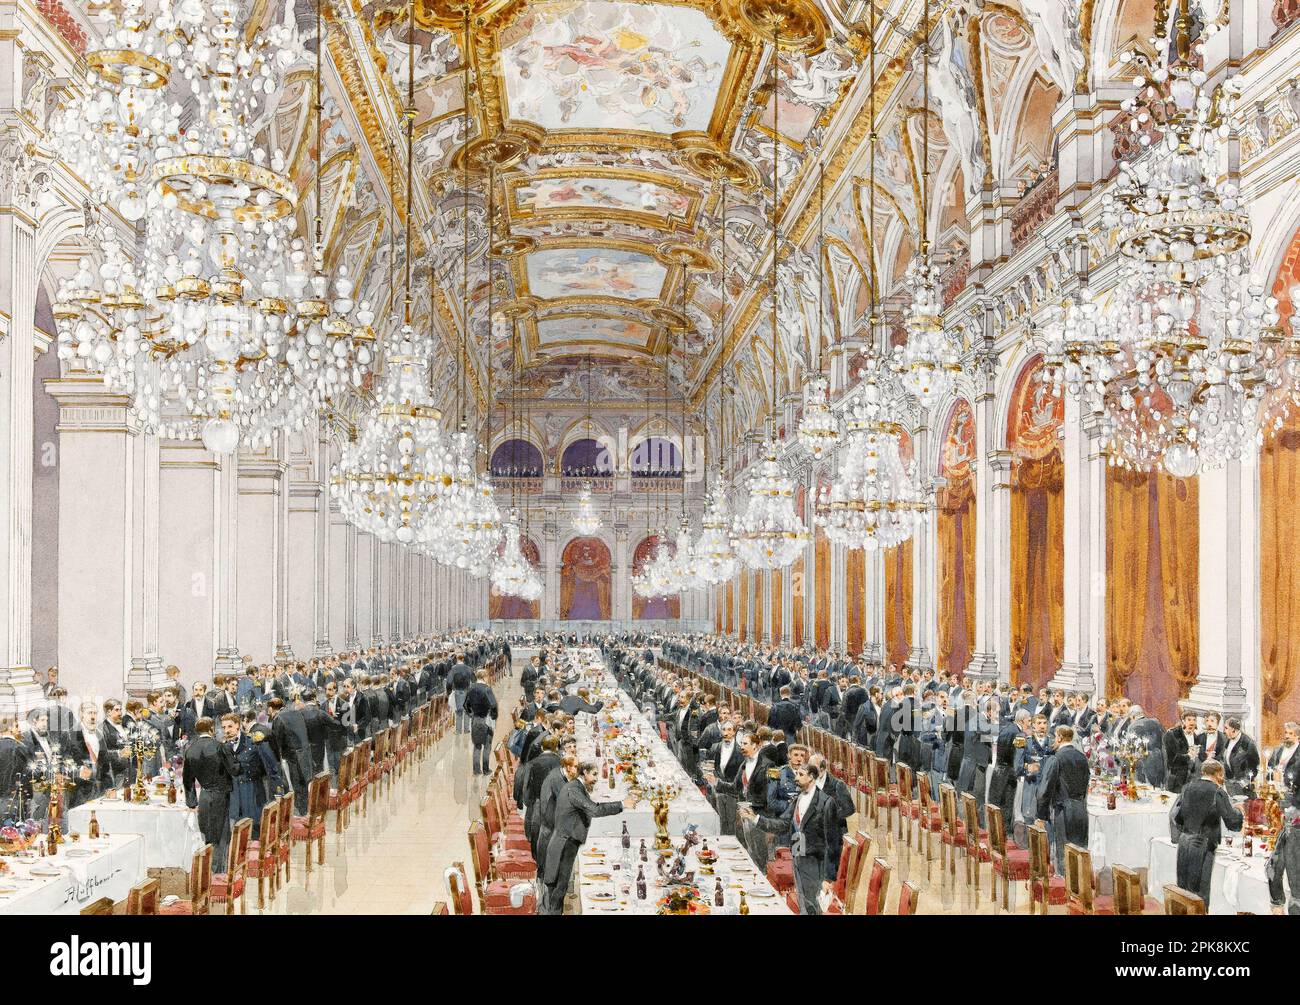 Banquet of the officers of the Russian Navy, in the village hall at the Hôtel de Ville. Franco-Russian celebrations in Paris, October 19, 1893 by Fédor Hoffbauer Stock Photo